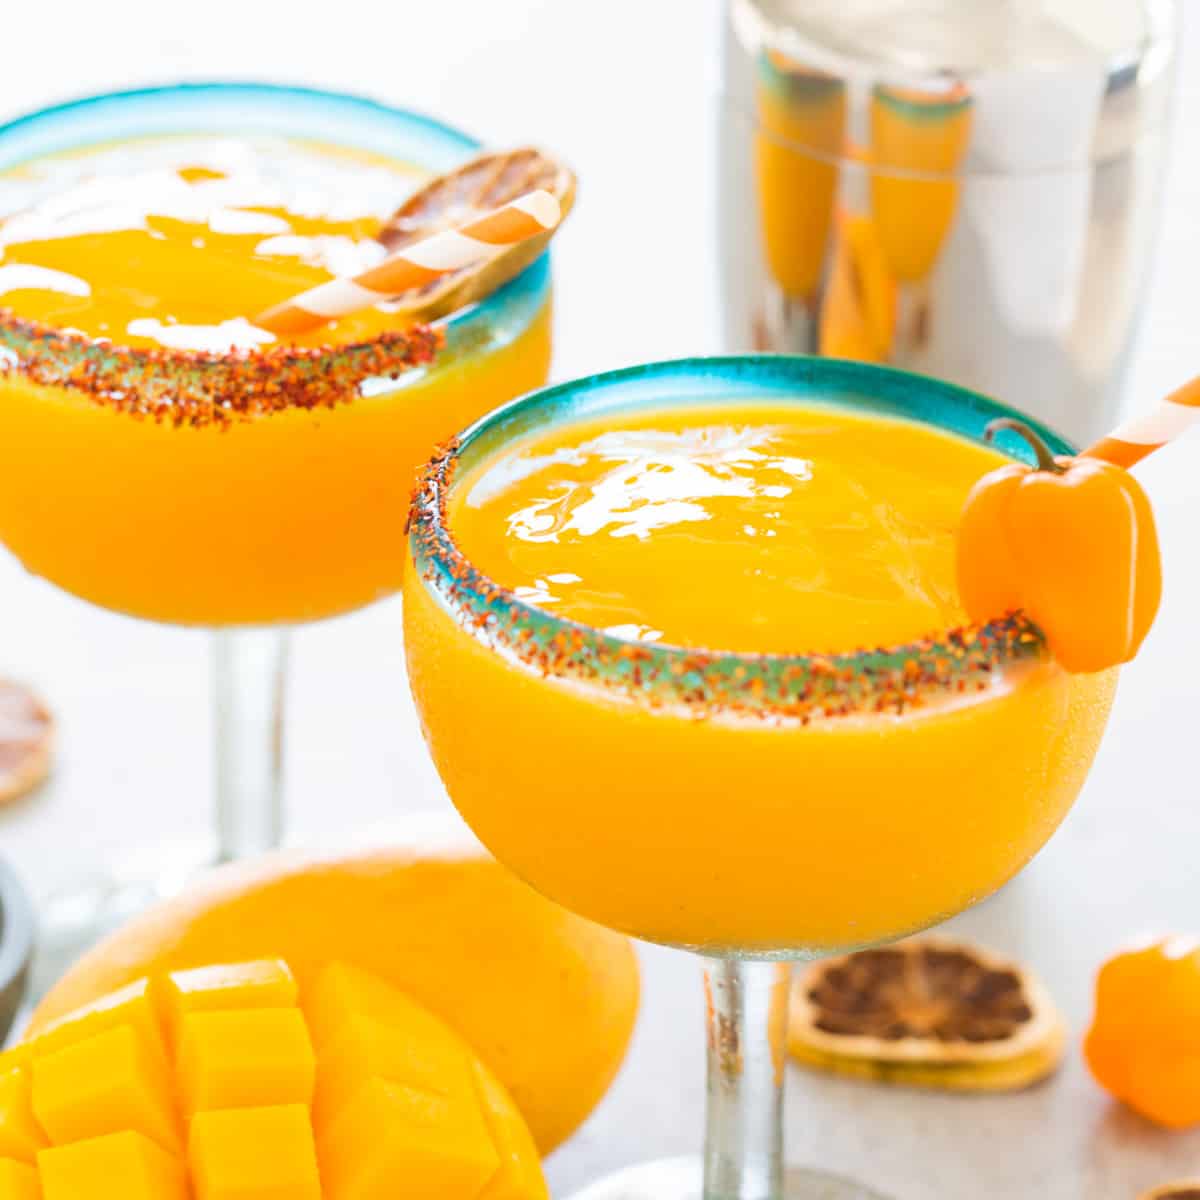 Two Mango Habanero Margaritas in glasses with garnishes and a fresh mango.